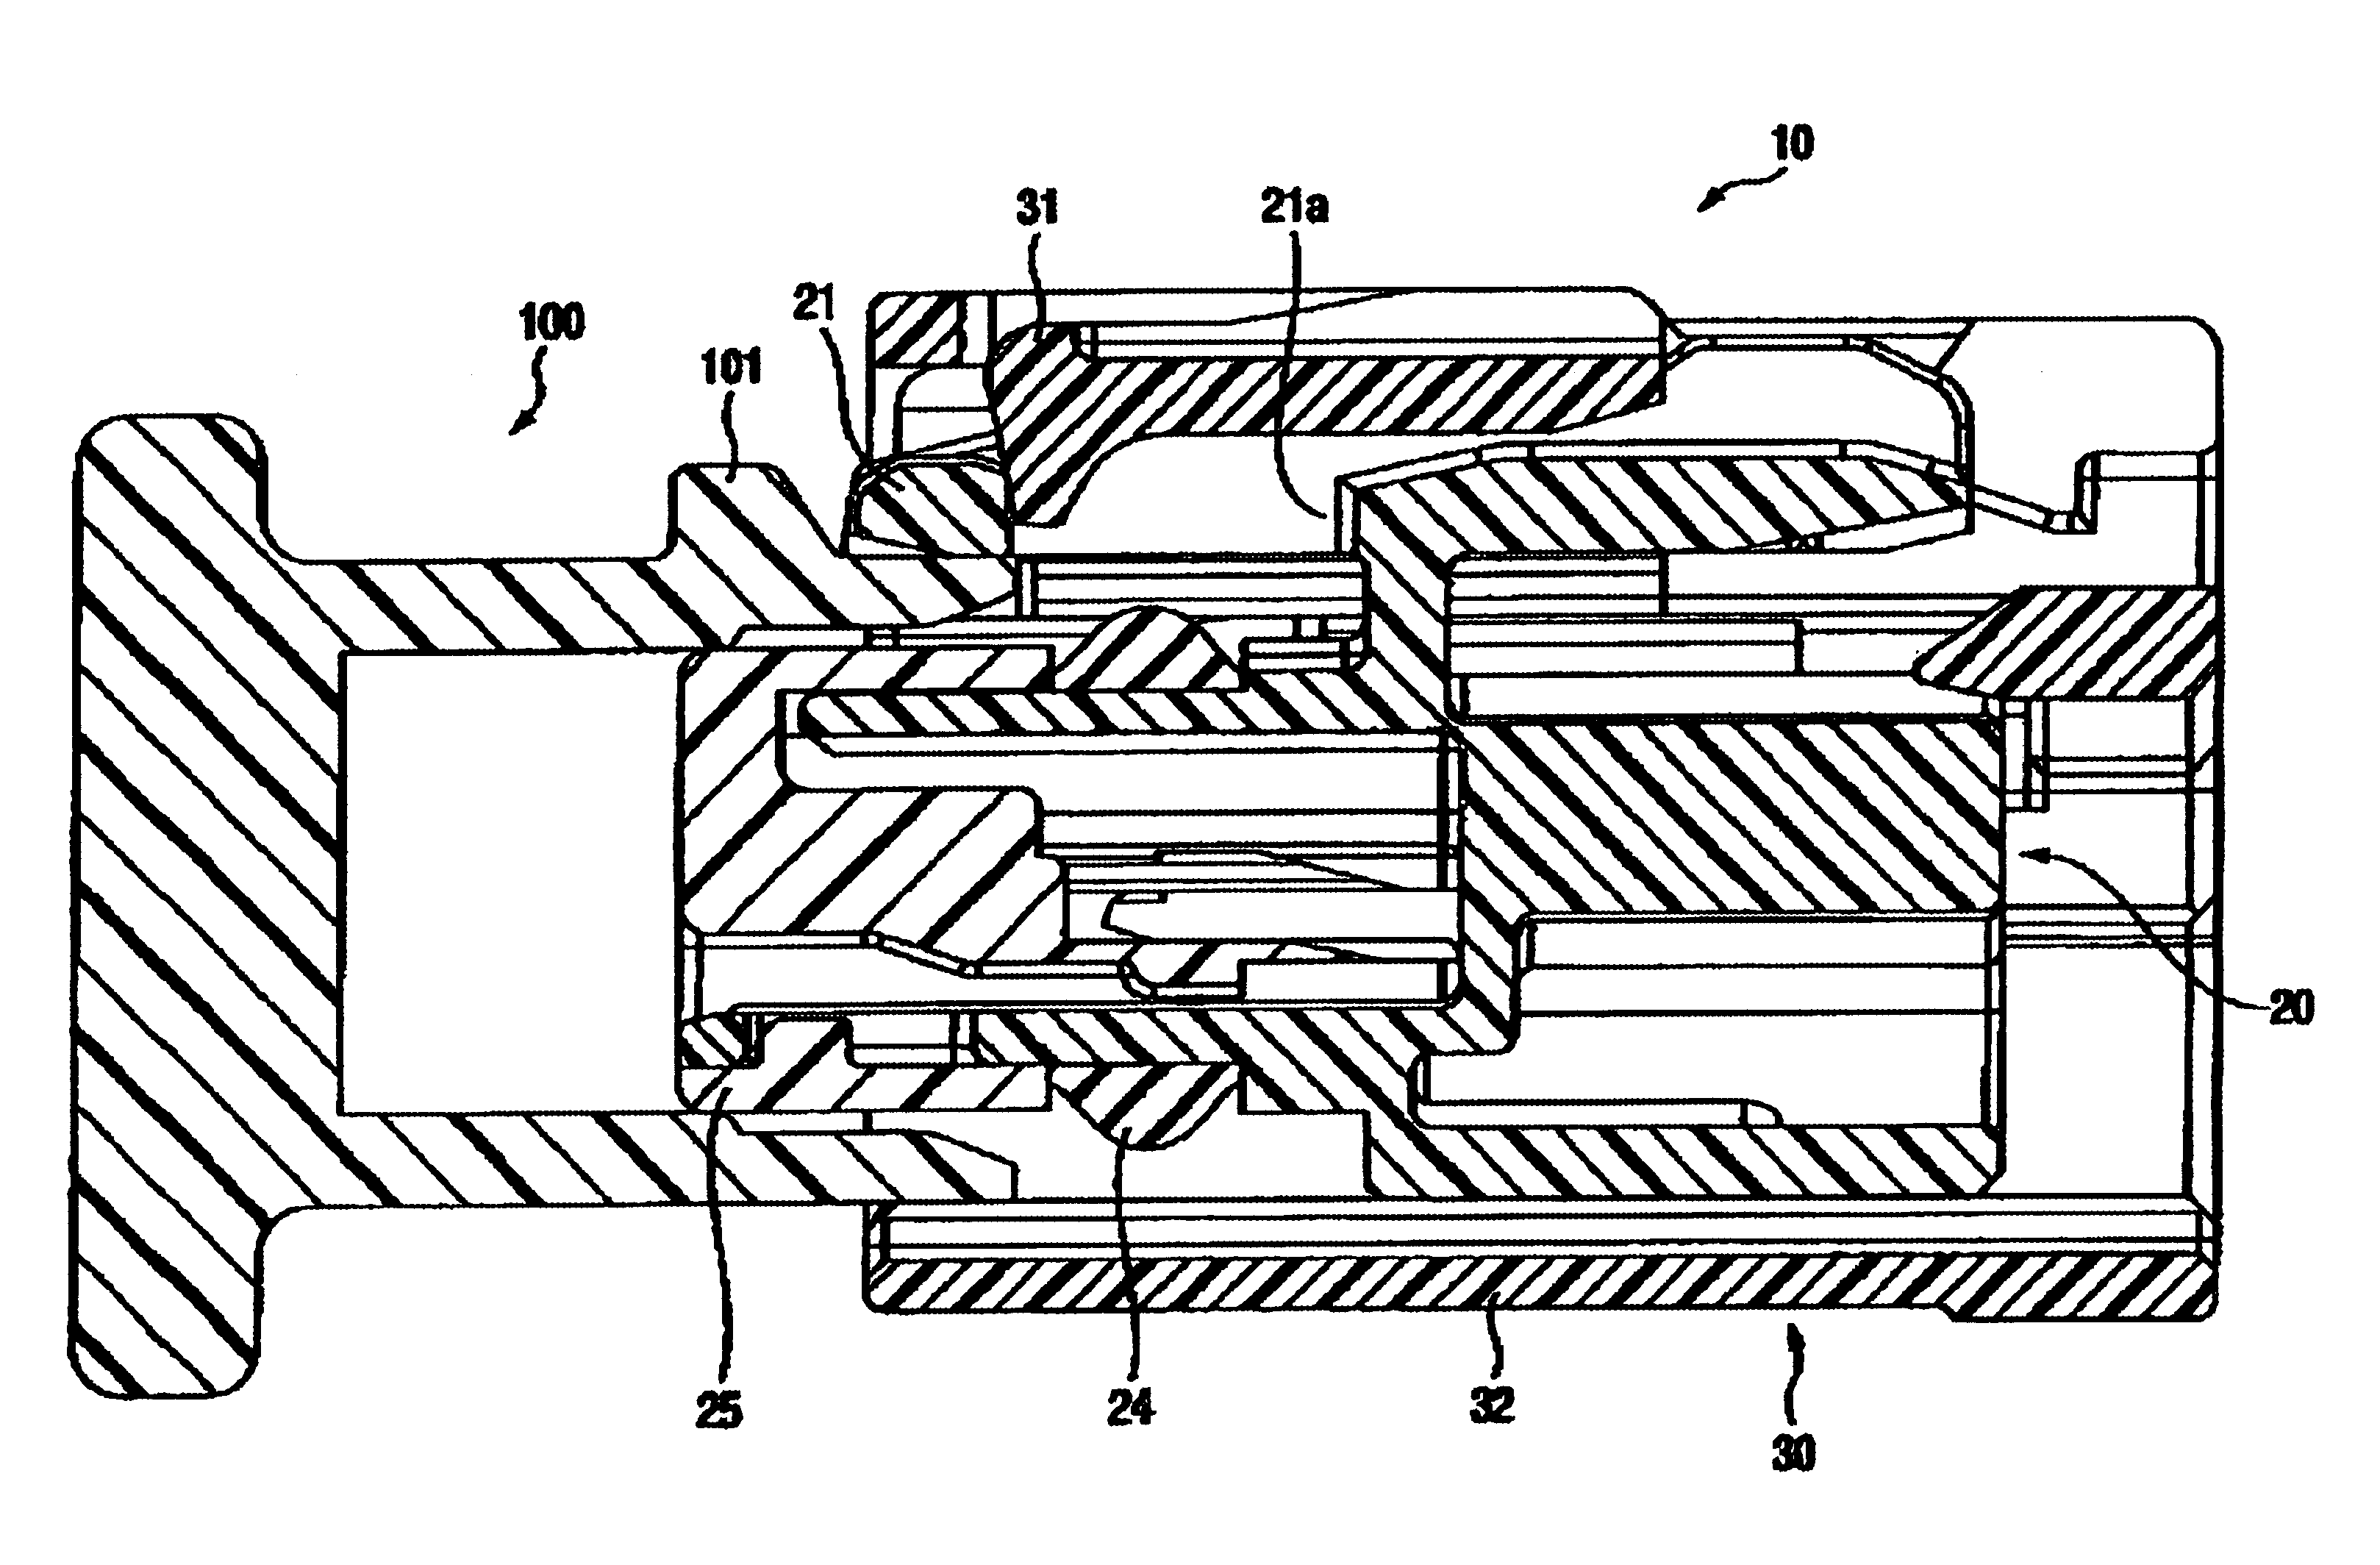 Connector capable of preventing incomplete fitting